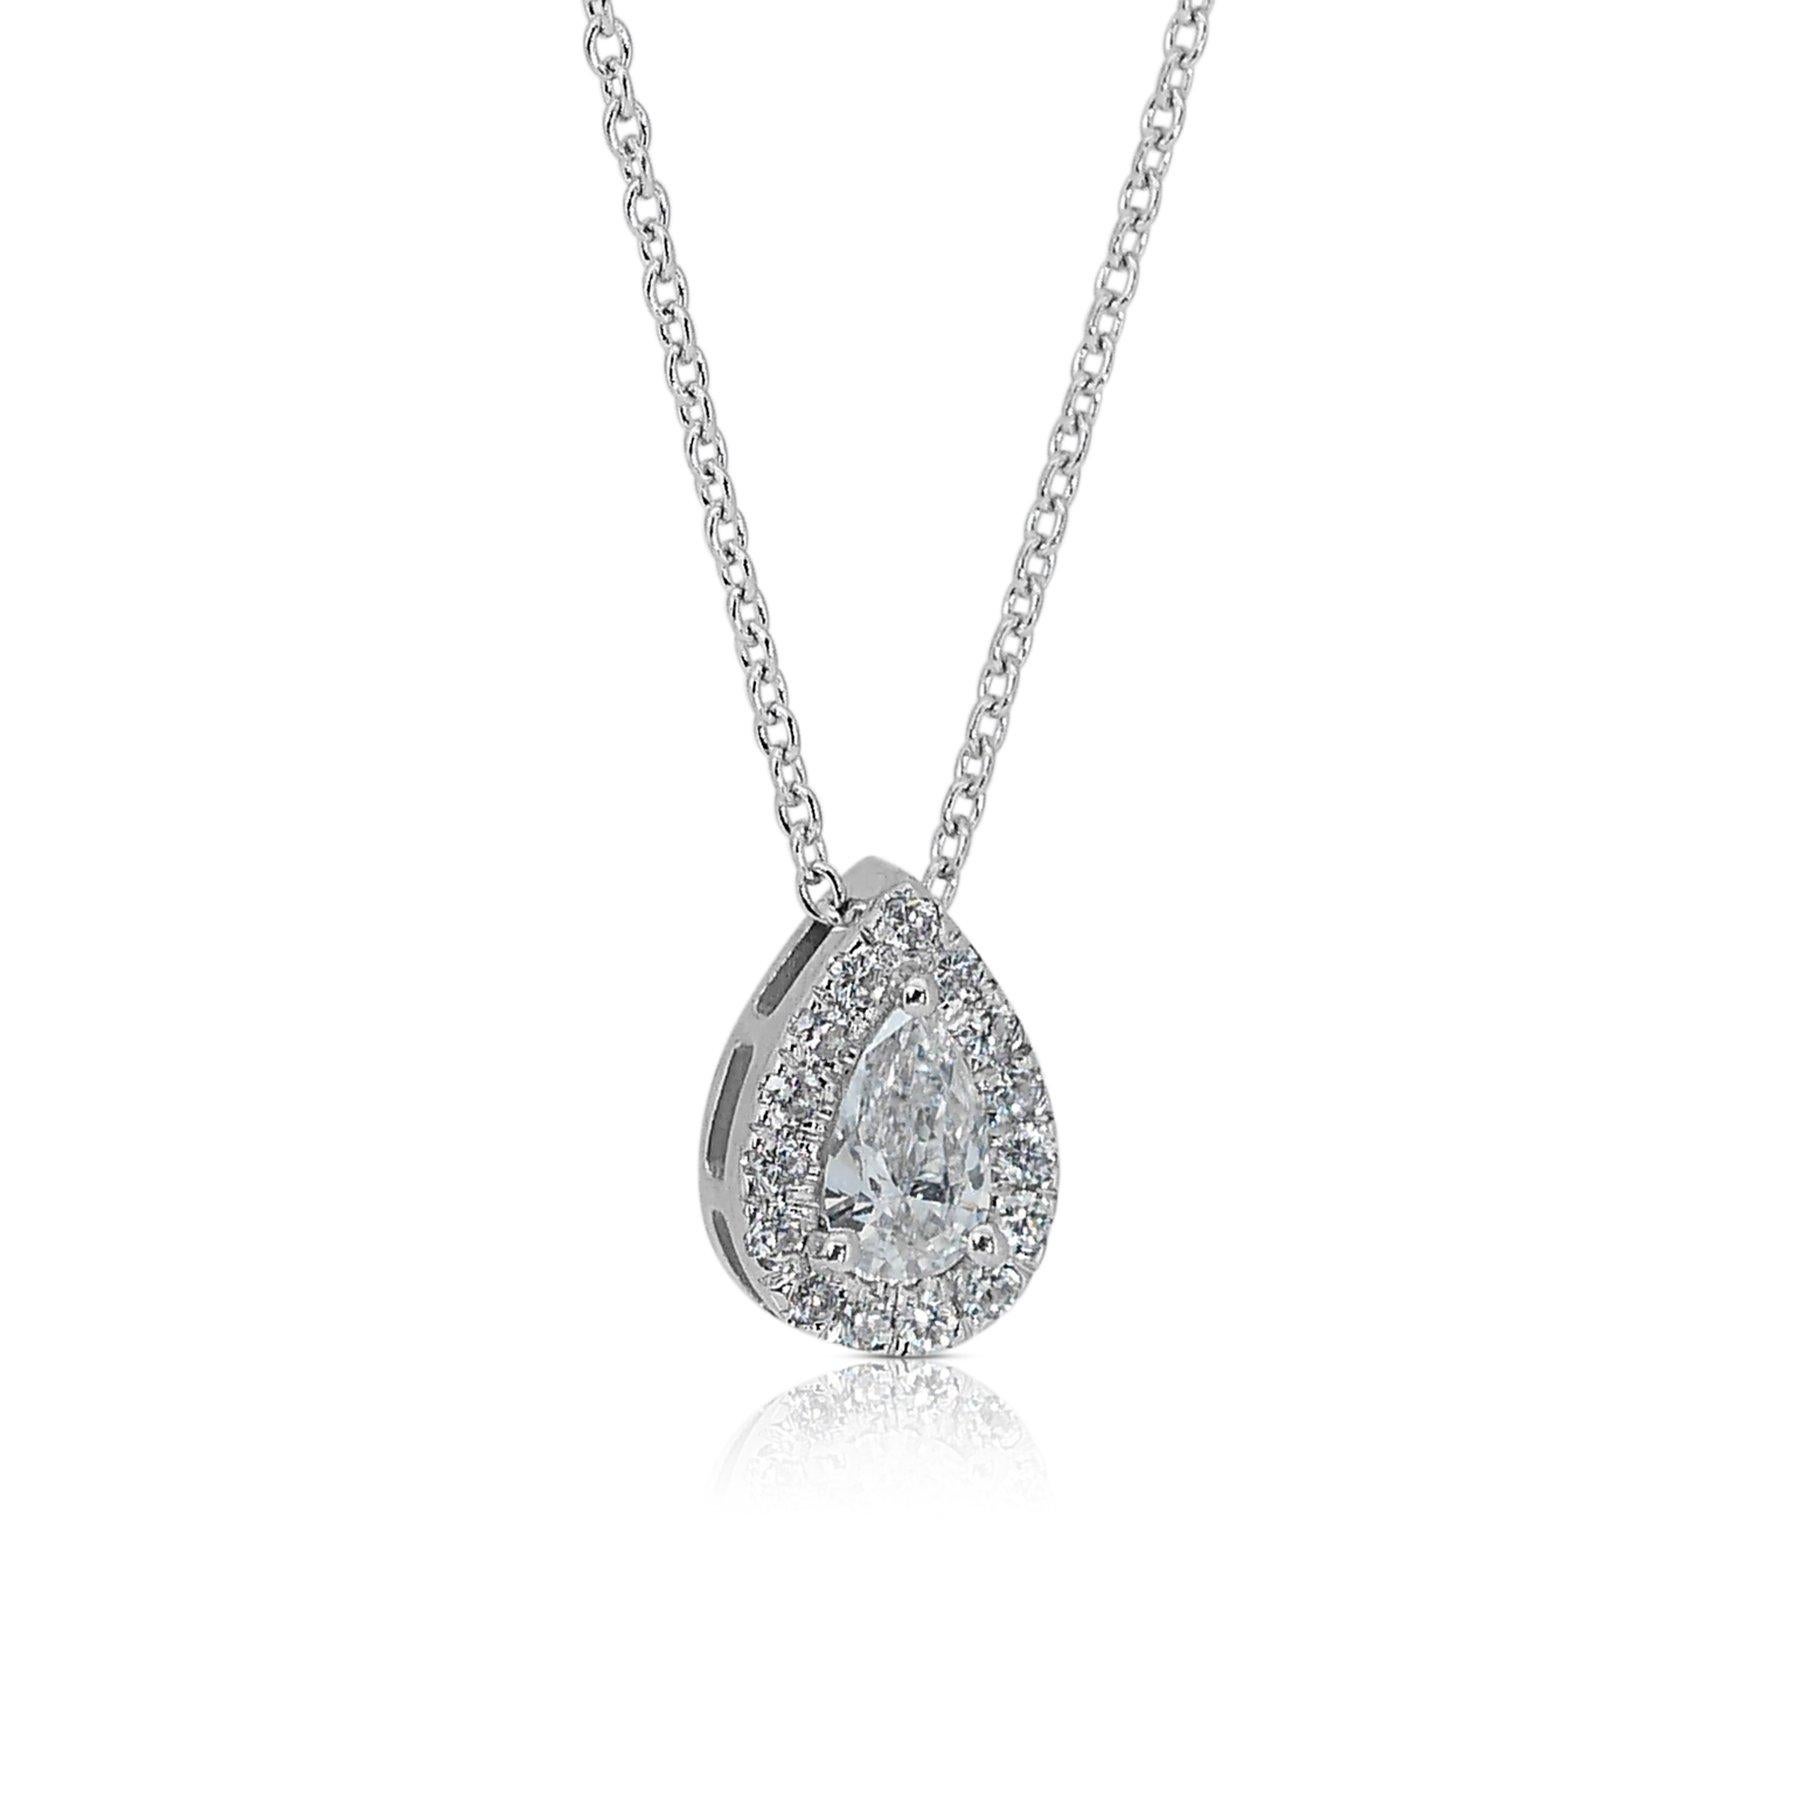 Pear Cut Exquisite Necklace with a radiant 0.3ct Pear Shaped Natural Diamond